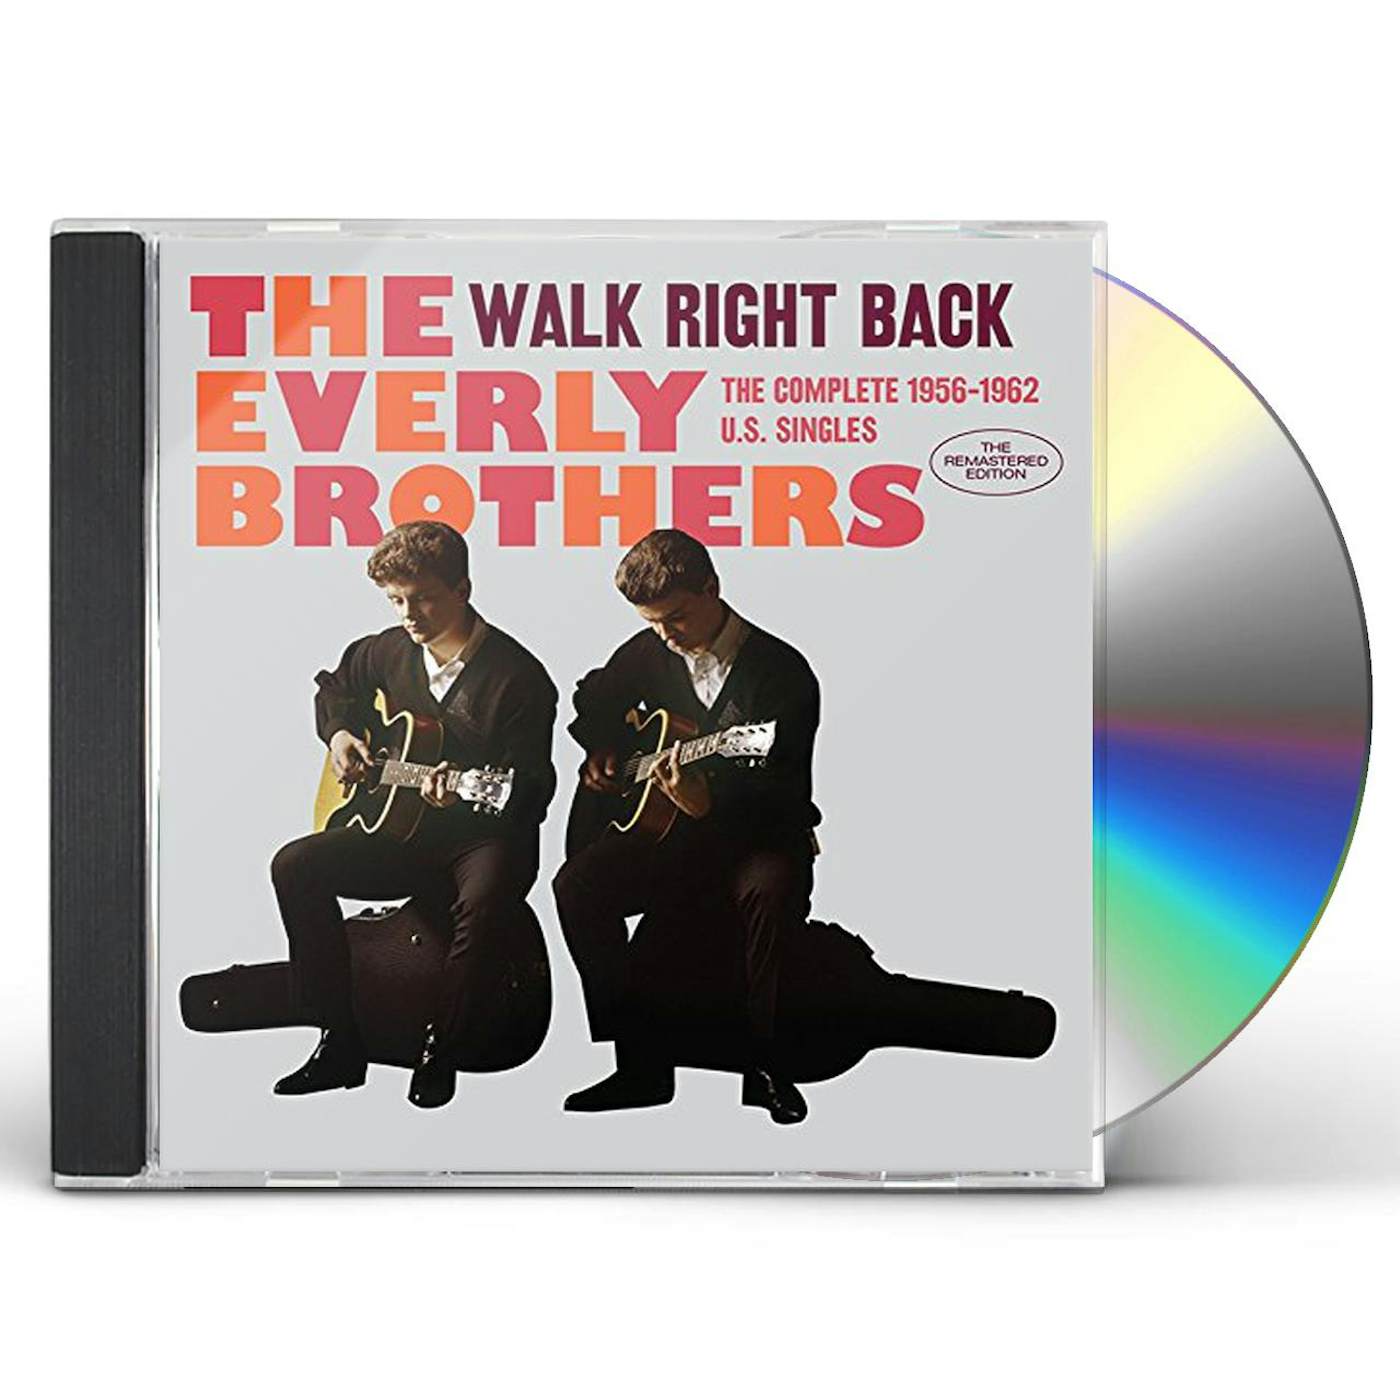 The Everly Brothers WALK RIGHT BACK: COMPLETE 1956-1962 U.S. SINGLES CD